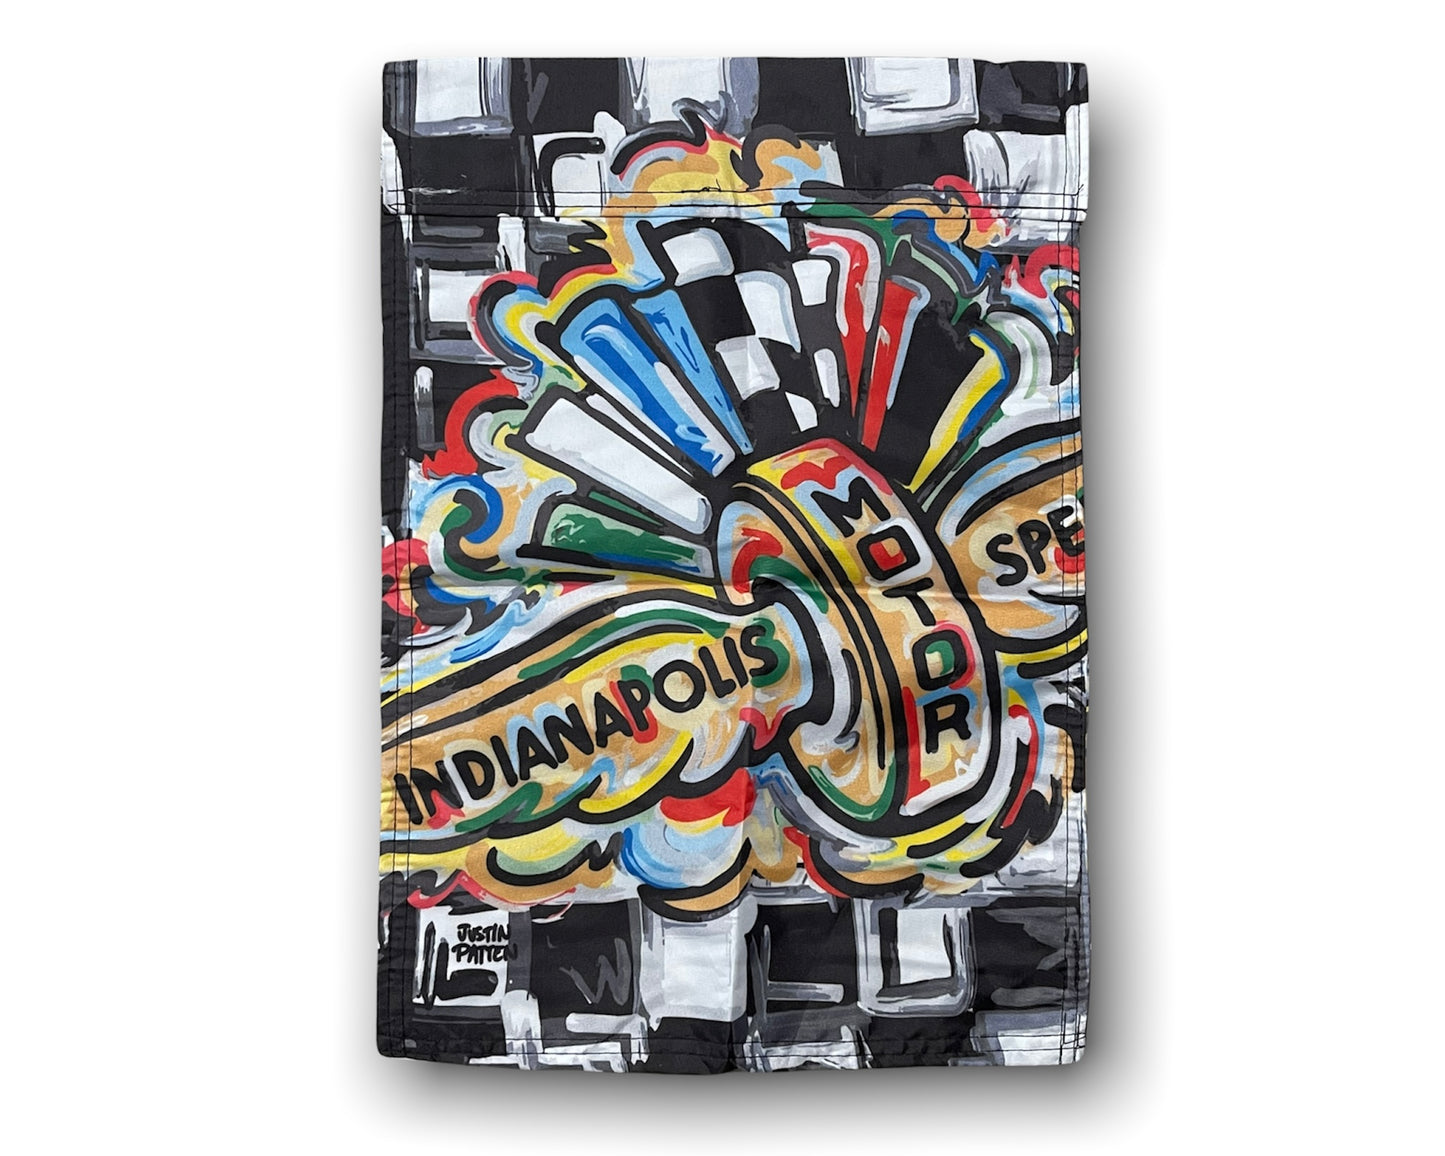 Indianapolis Motor Speedway Wing and Wheel Garden Flag (12”x18” in.) by Justin Patten